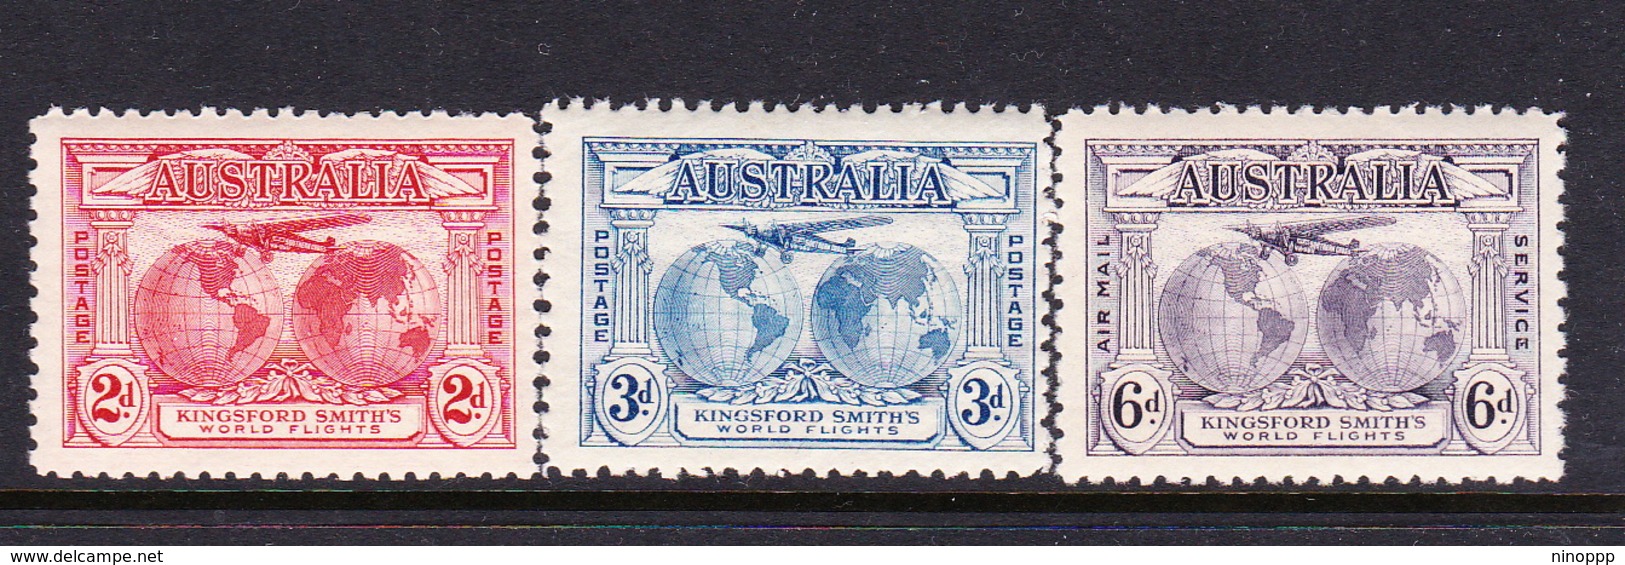 Australia SG 121-123 1931 Kingsford Smith's Flights, Mint Never Hinged - Mint Stamps